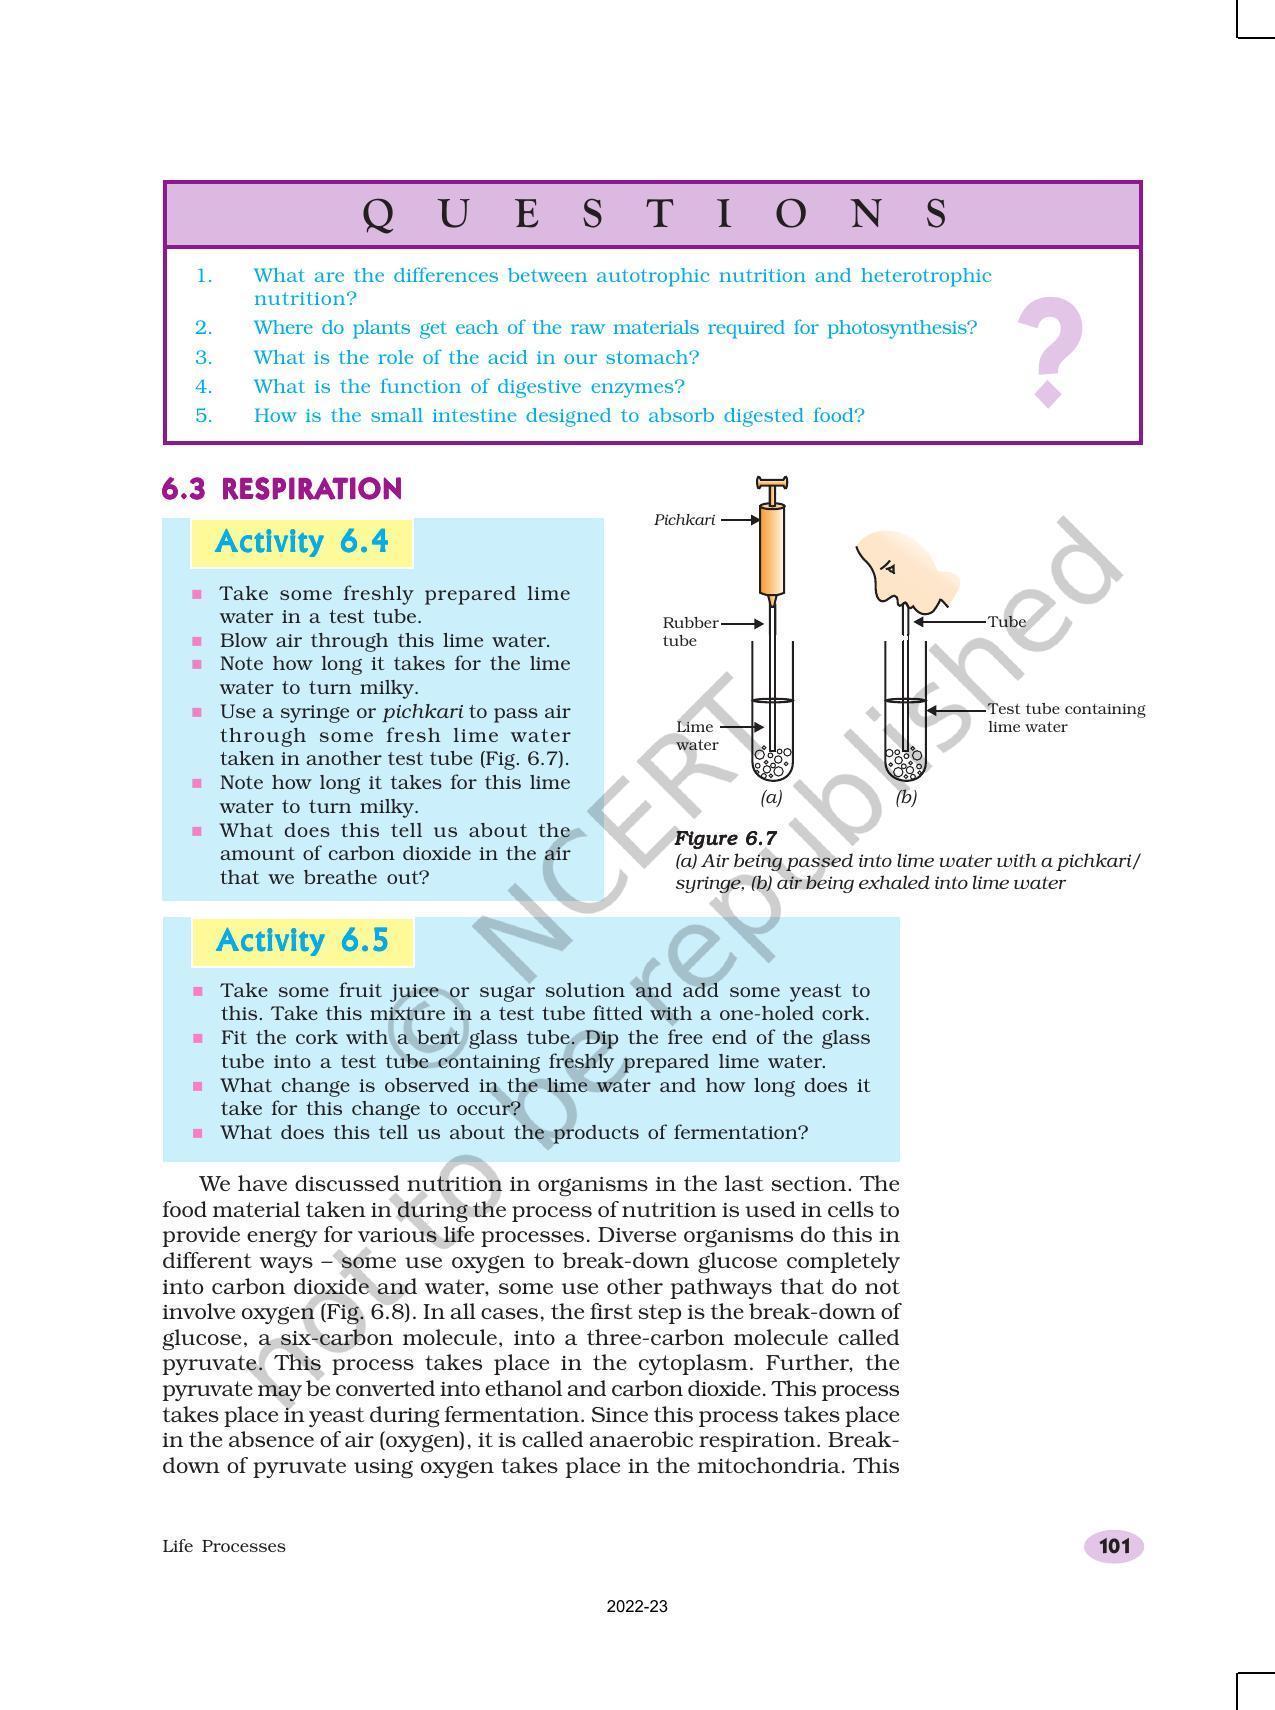 NCERT Book for Class 10 Science Chapter 6 Life Processes - Page 9